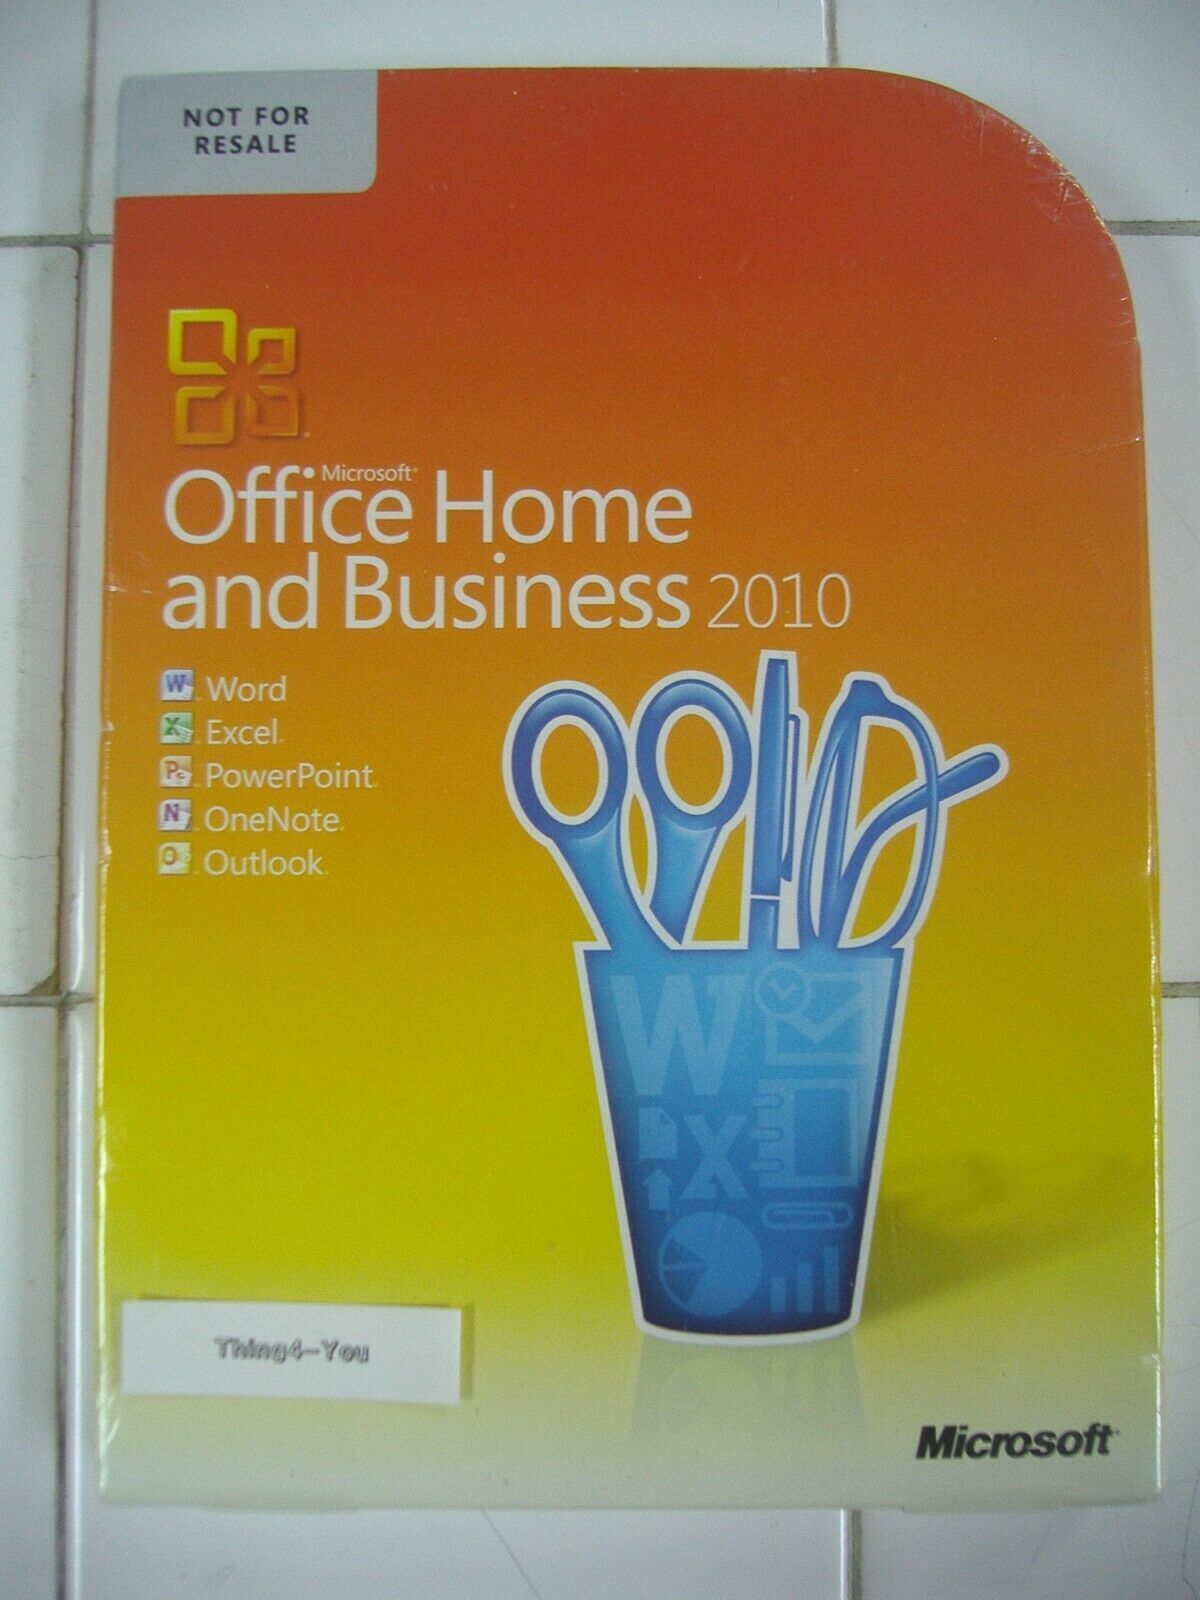 Microsoft Office 2010 Home and Business For 2 PCs Full Version =NEW SEALED BOX=